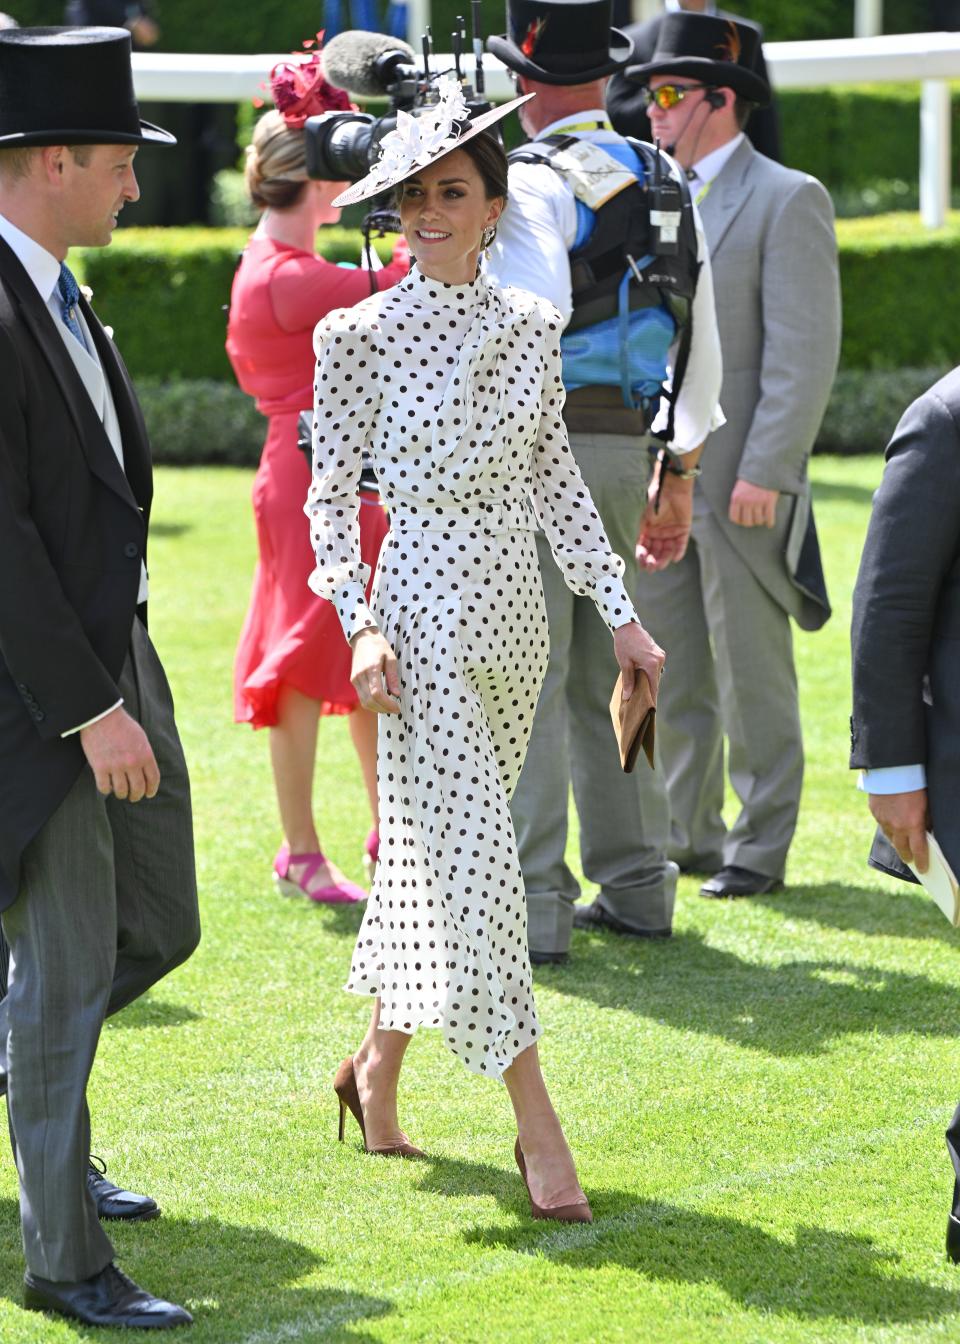 kate middleton in white and black long sleeve polka dot dress and hat, The Duke and Duchess of Cambridge at the Royal Ascot 2022 on June 17, 2022 in Ascot, England. (Photo by Samir Hussein/WireImage)